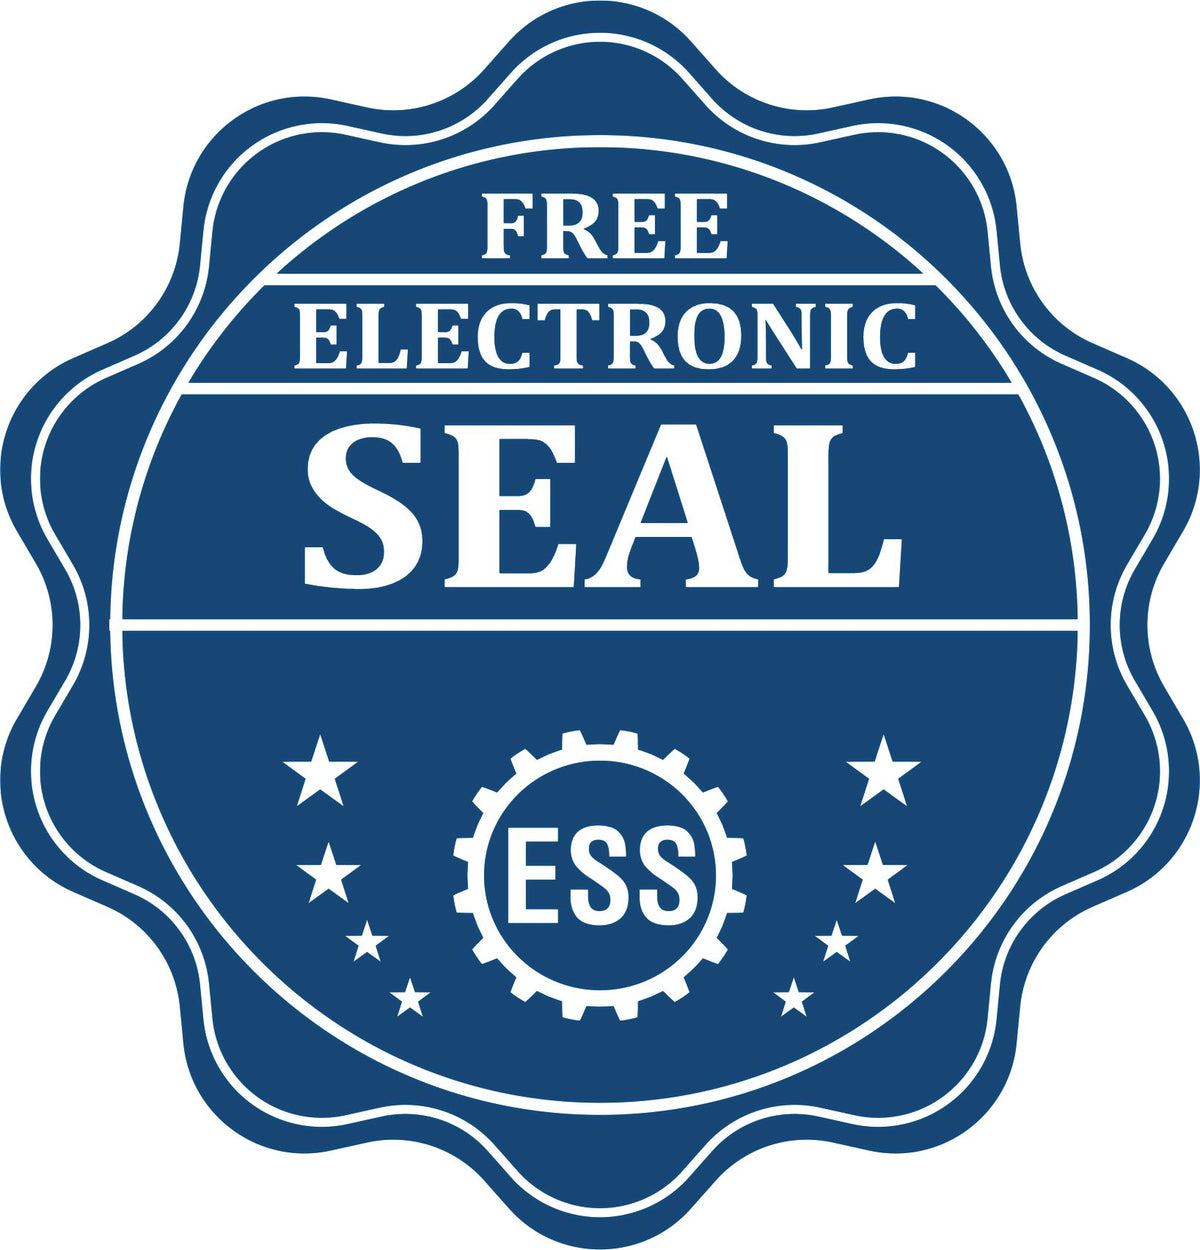 A badge showing a free electronic seal for the Premium MaxLight Pre-Inked North Carolina Geology Stamp with stars and the ESS gear on the emblem.